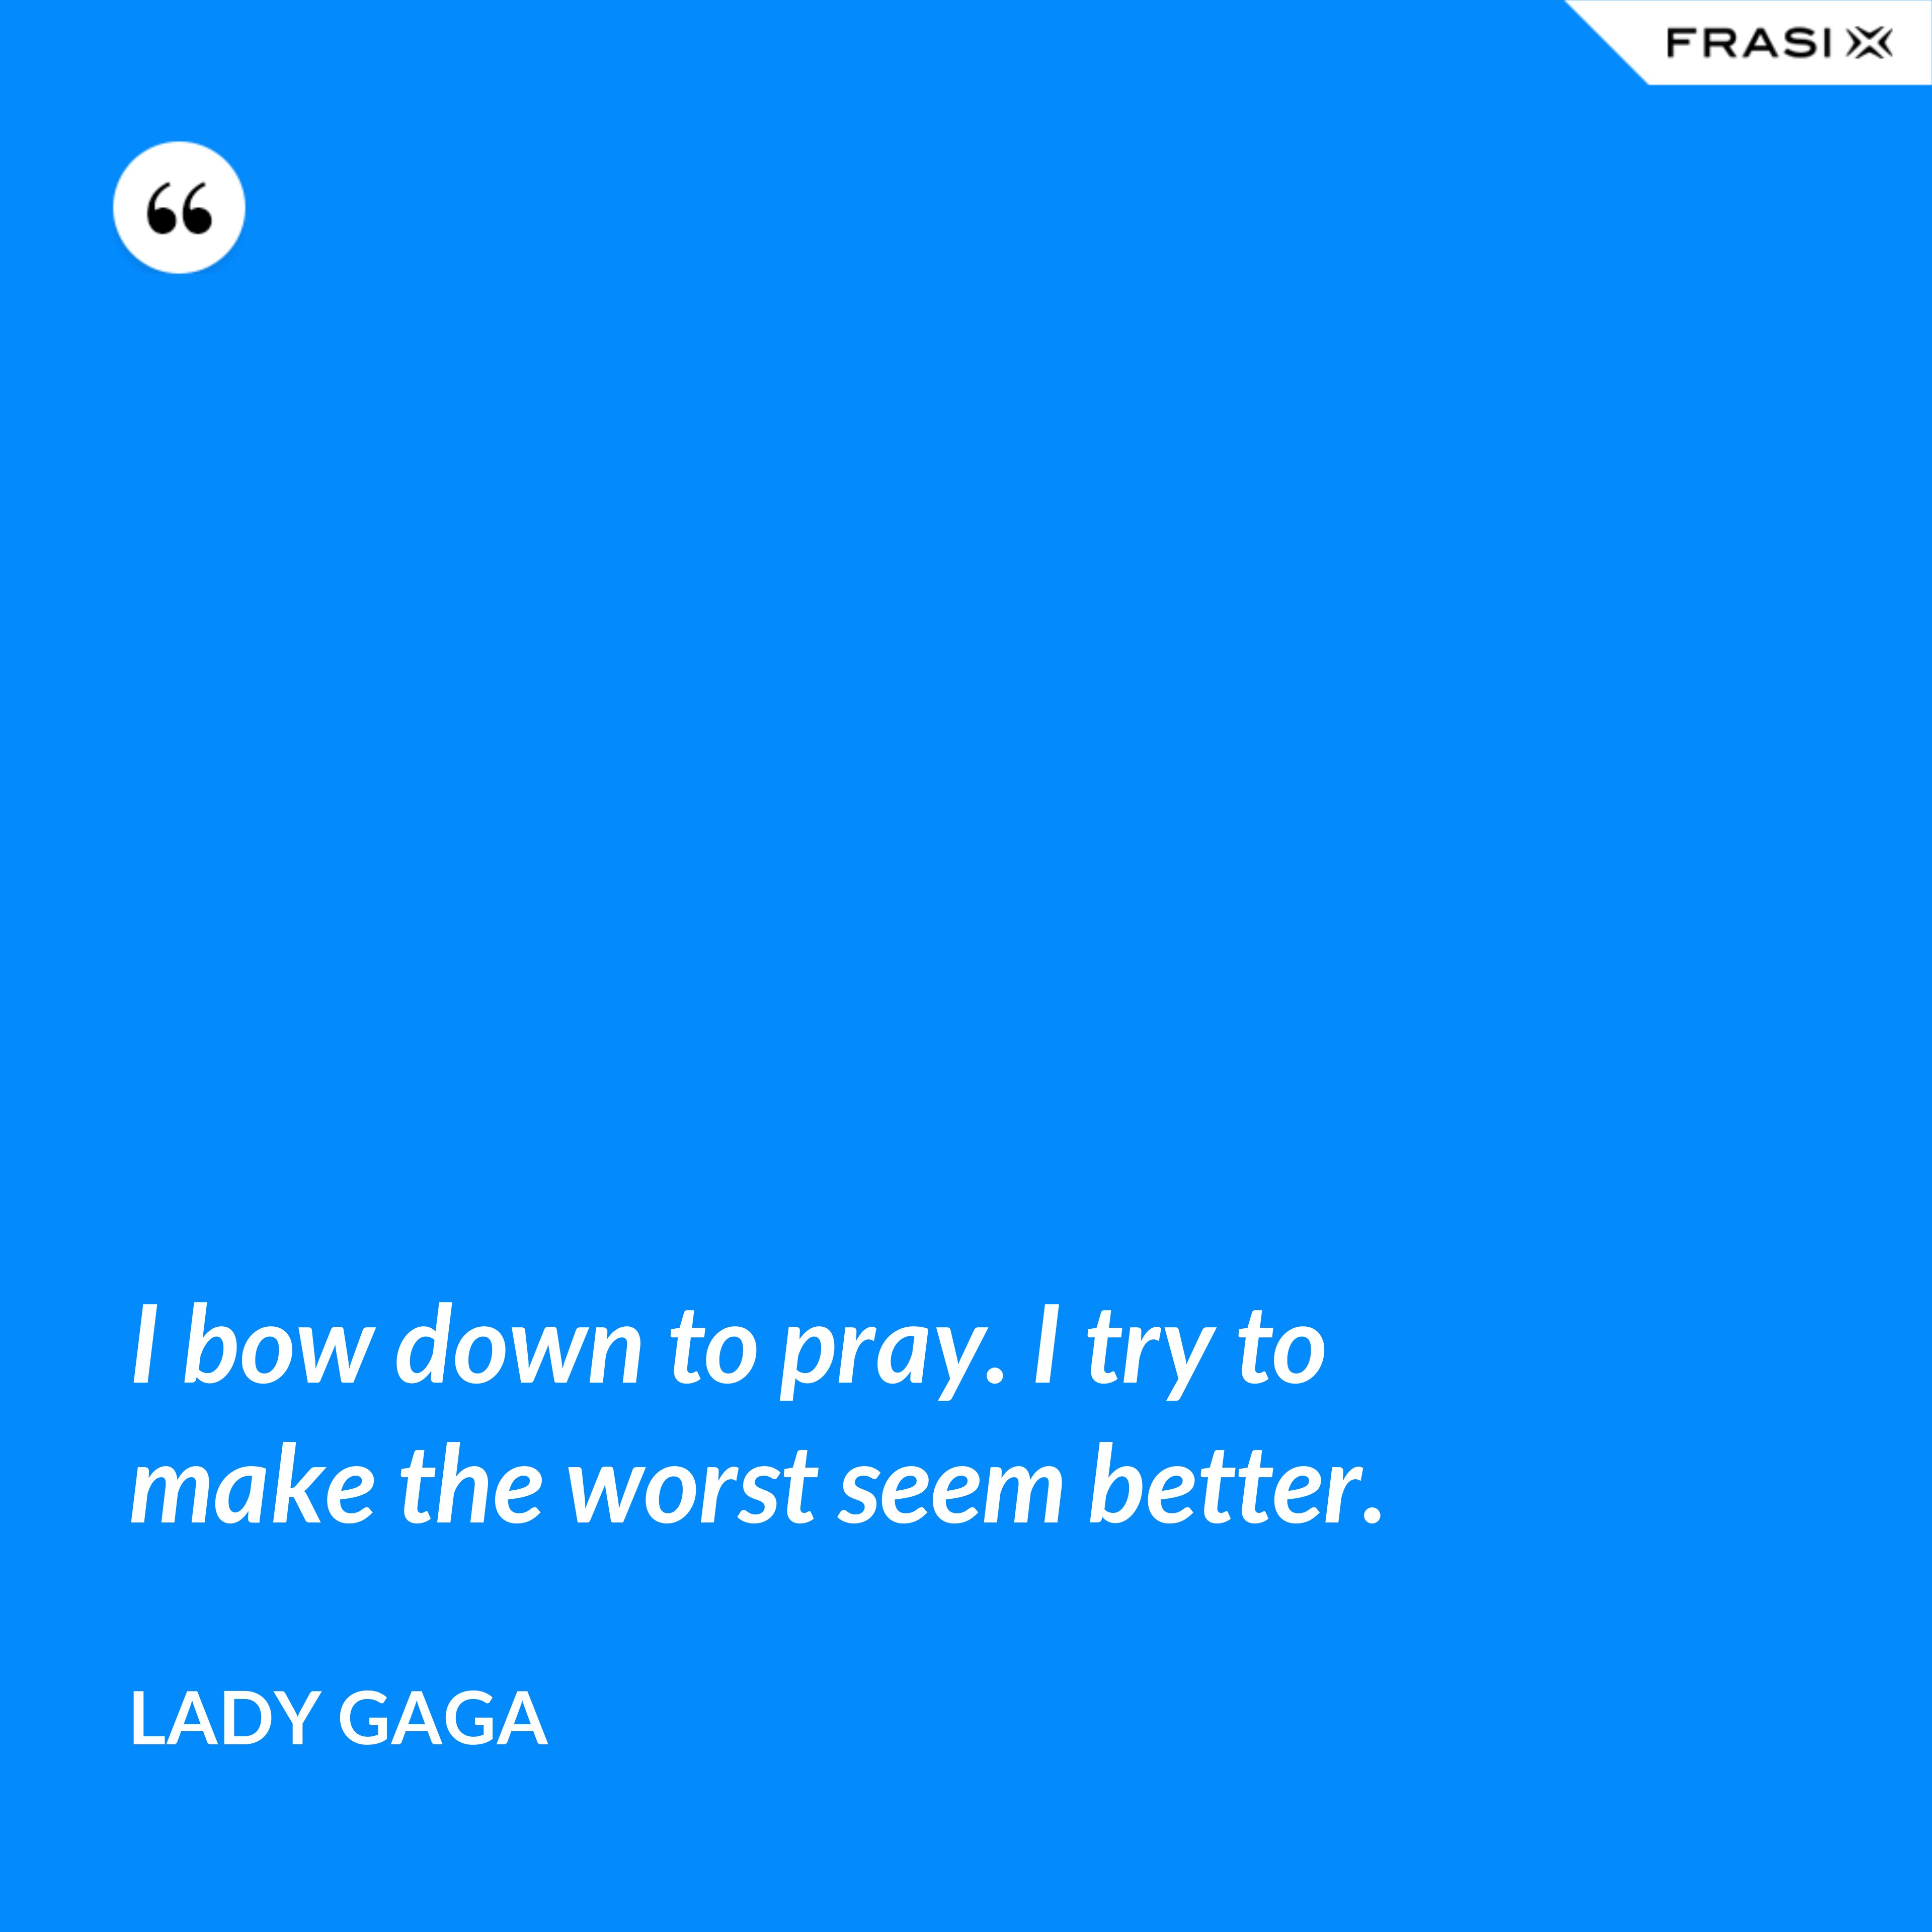 I bow down to pray. I try to make the worst seem better. - Lady Gaga